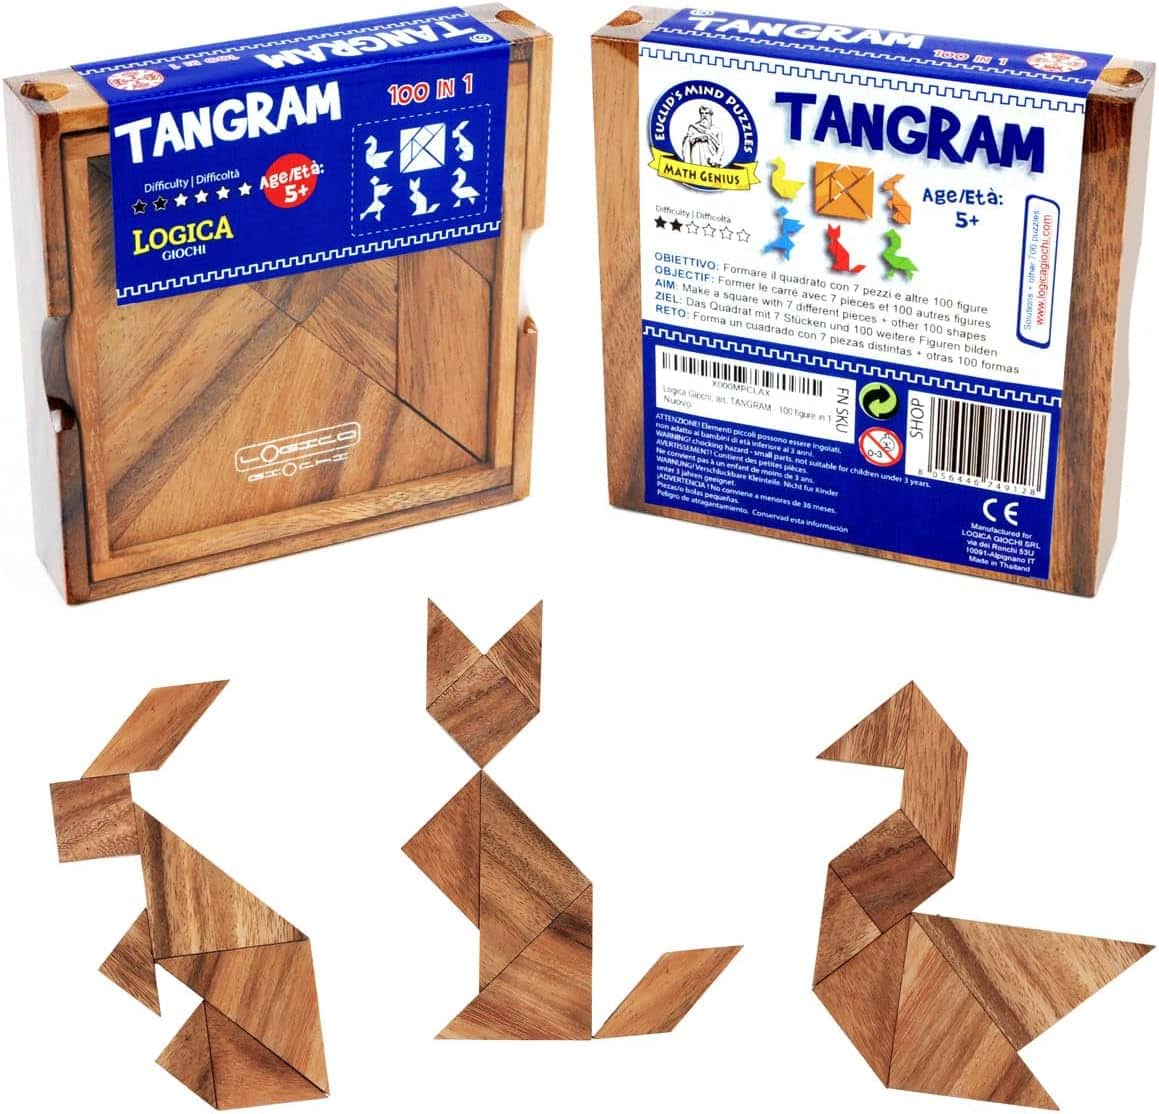 Logica Puzzles Art. Tangram - Wooden Puzzle - Brain Teaser in Fine Wood - 100 Puzzles in 1 - Educational Puzzle - Mind Puzzle - with Wooden Container